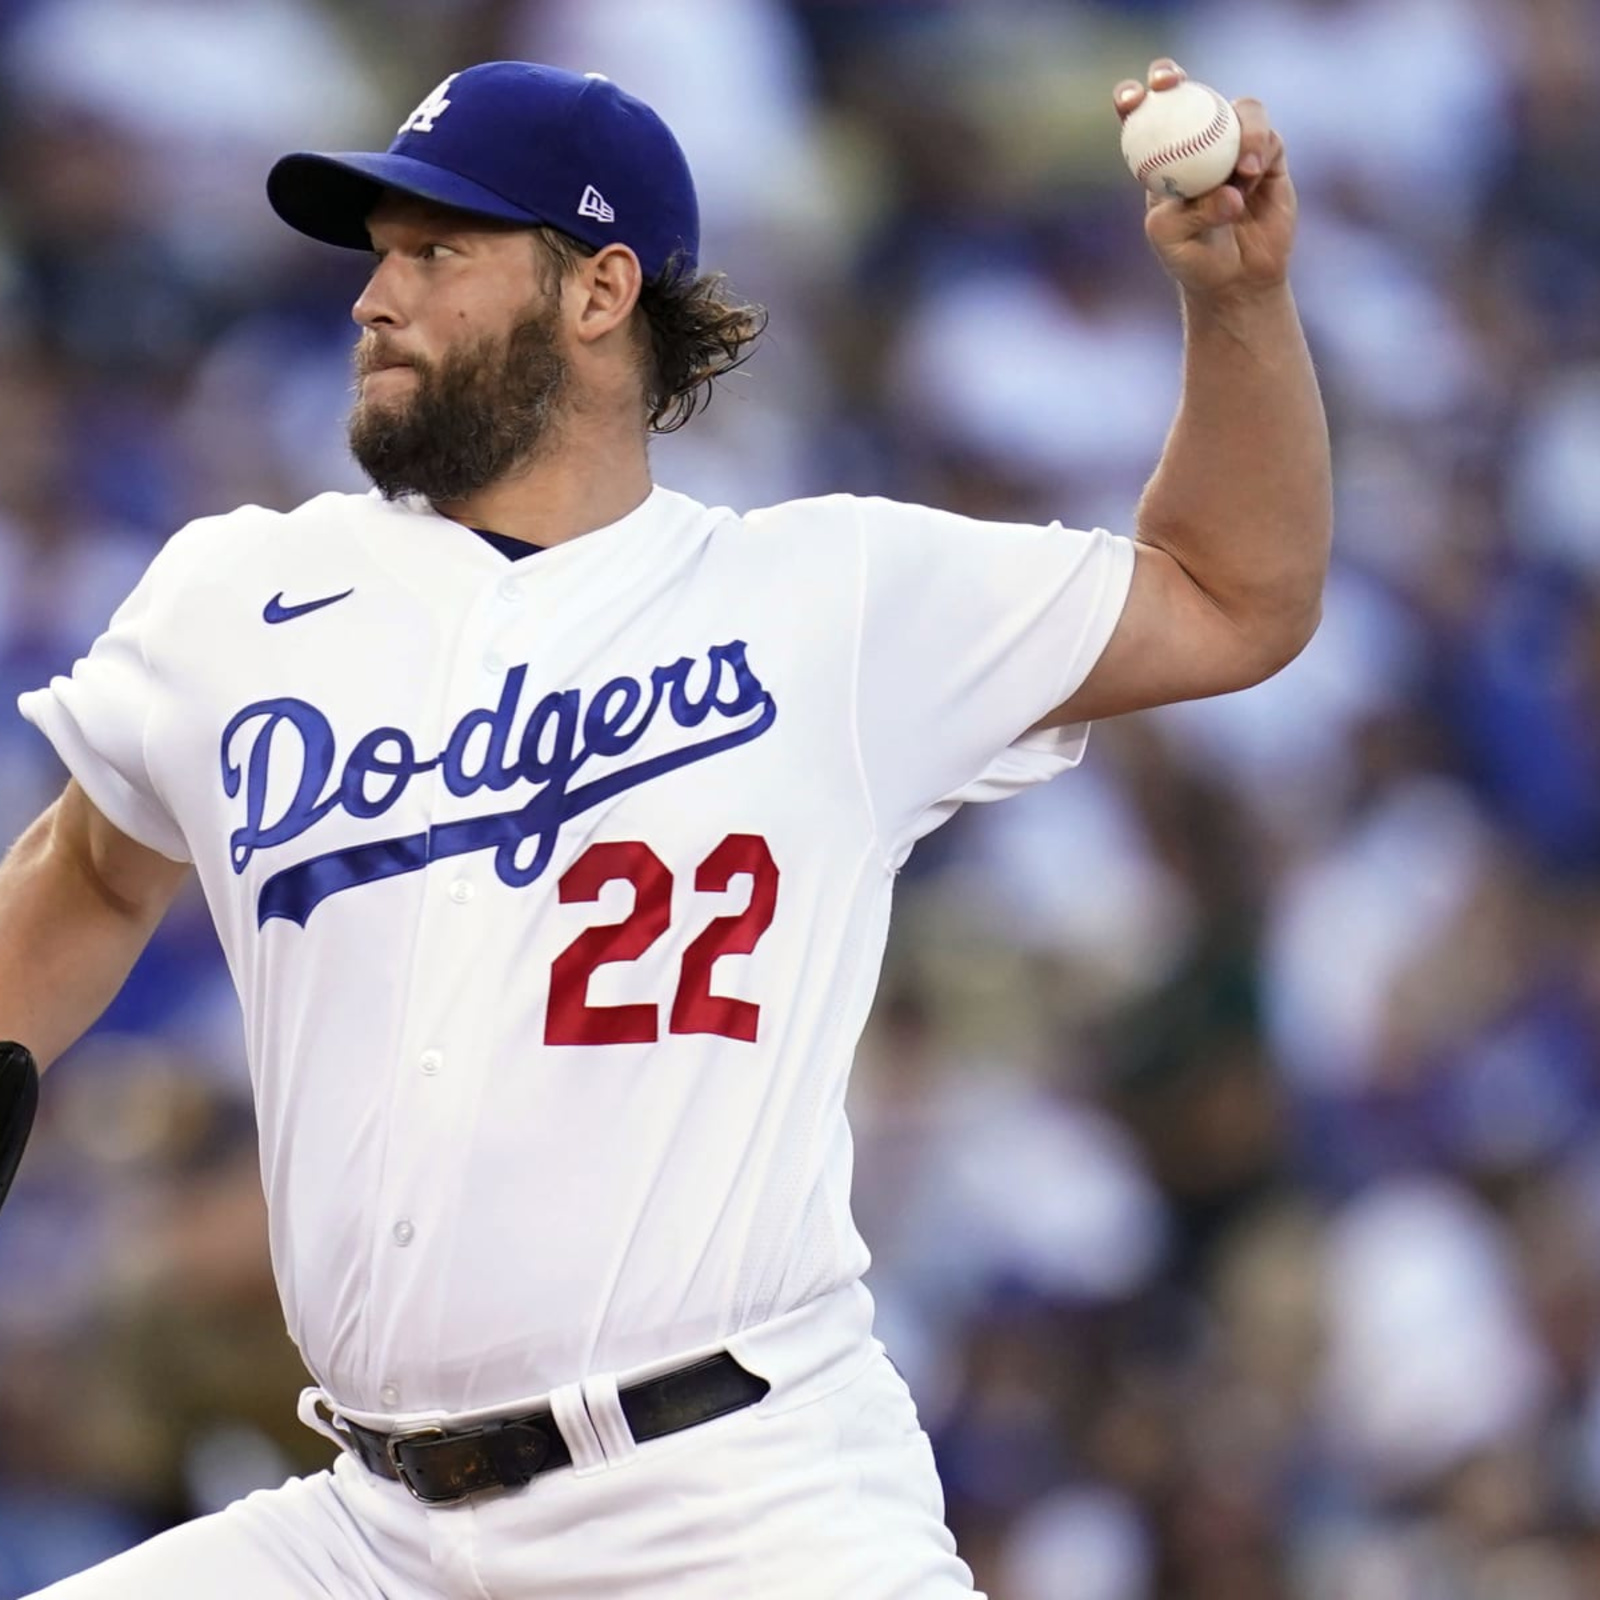 World Baseball Classic 2023: Clayton Kershaw will not pitch in